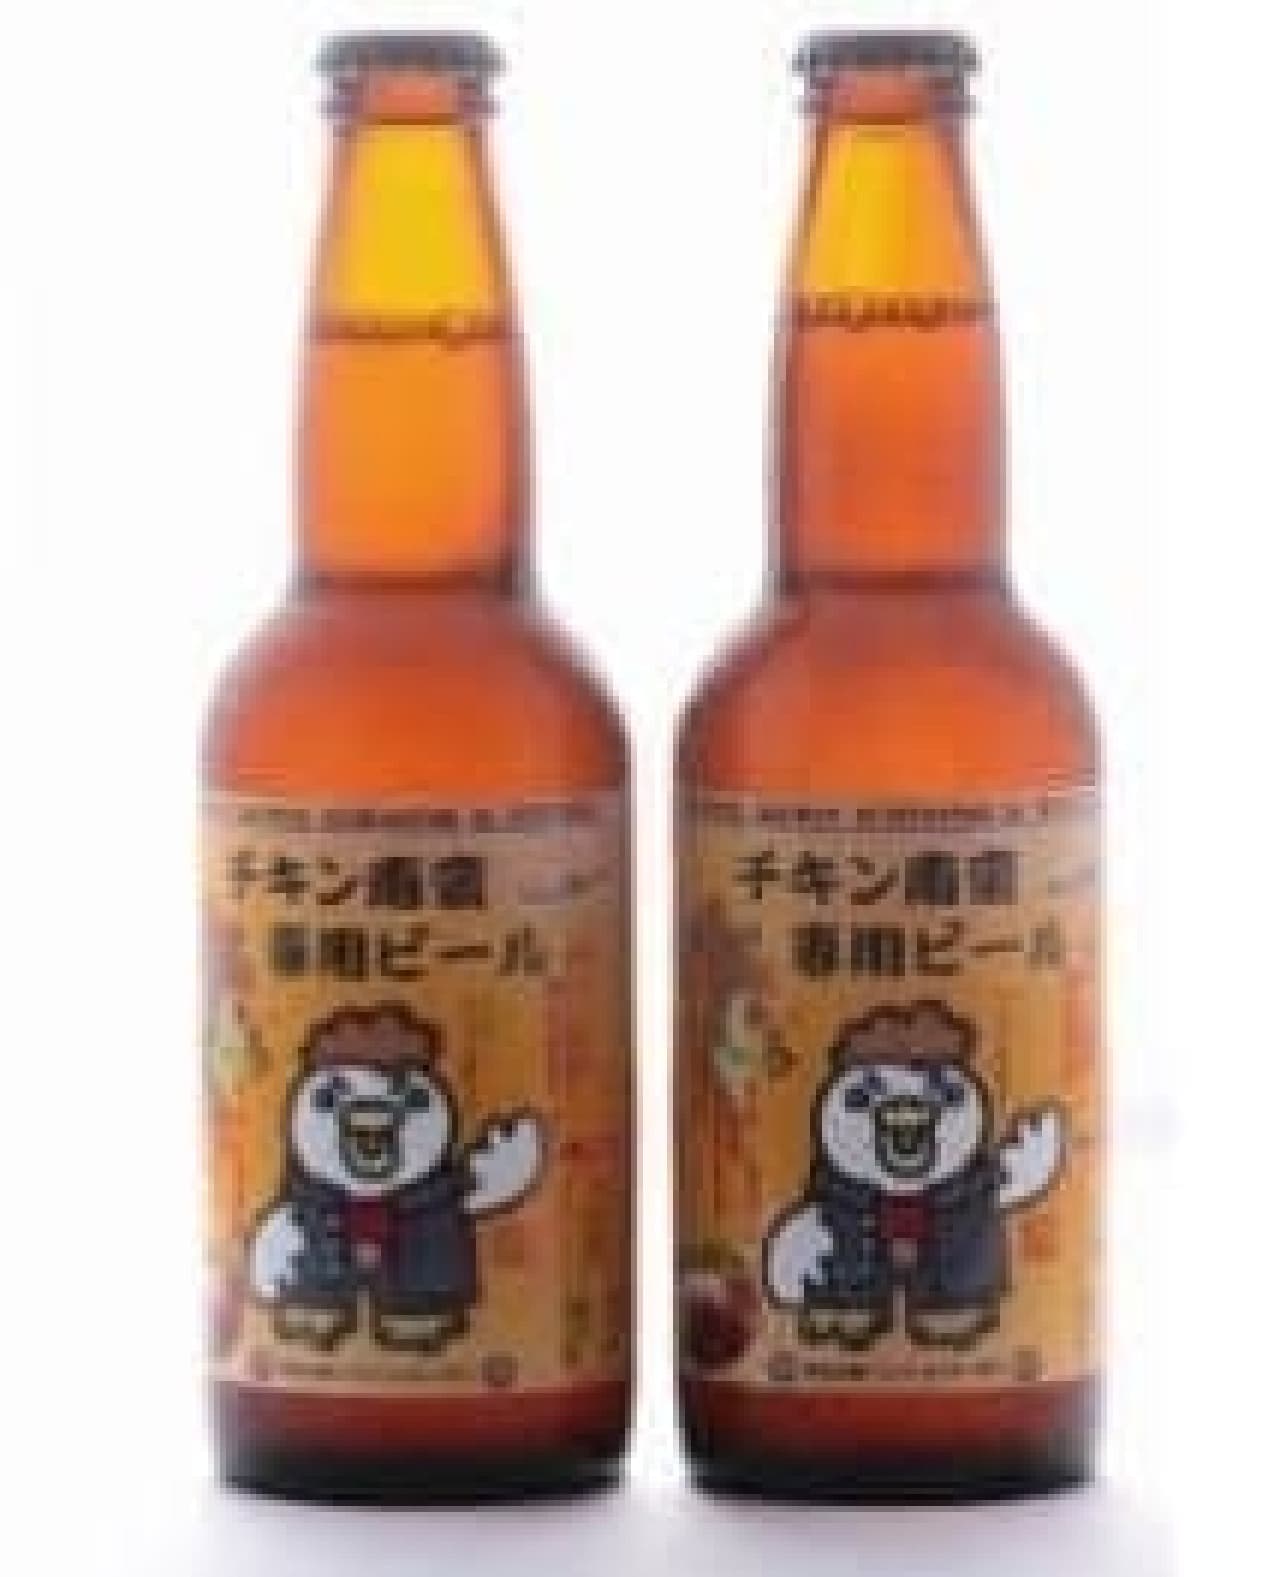 How about a beer that goes well with chicken nanban?